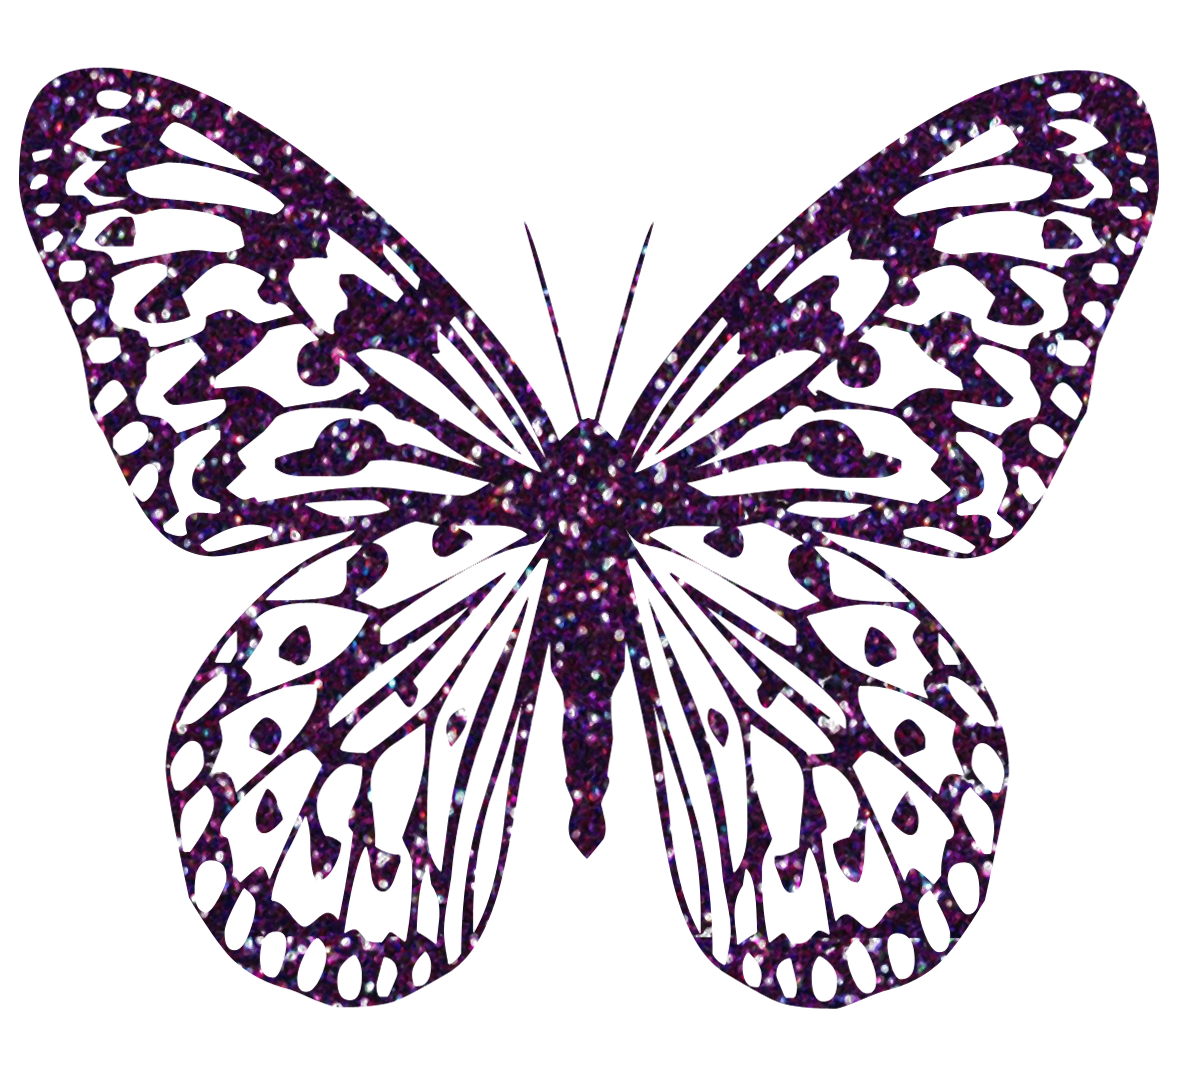 decorative clipart butterfly